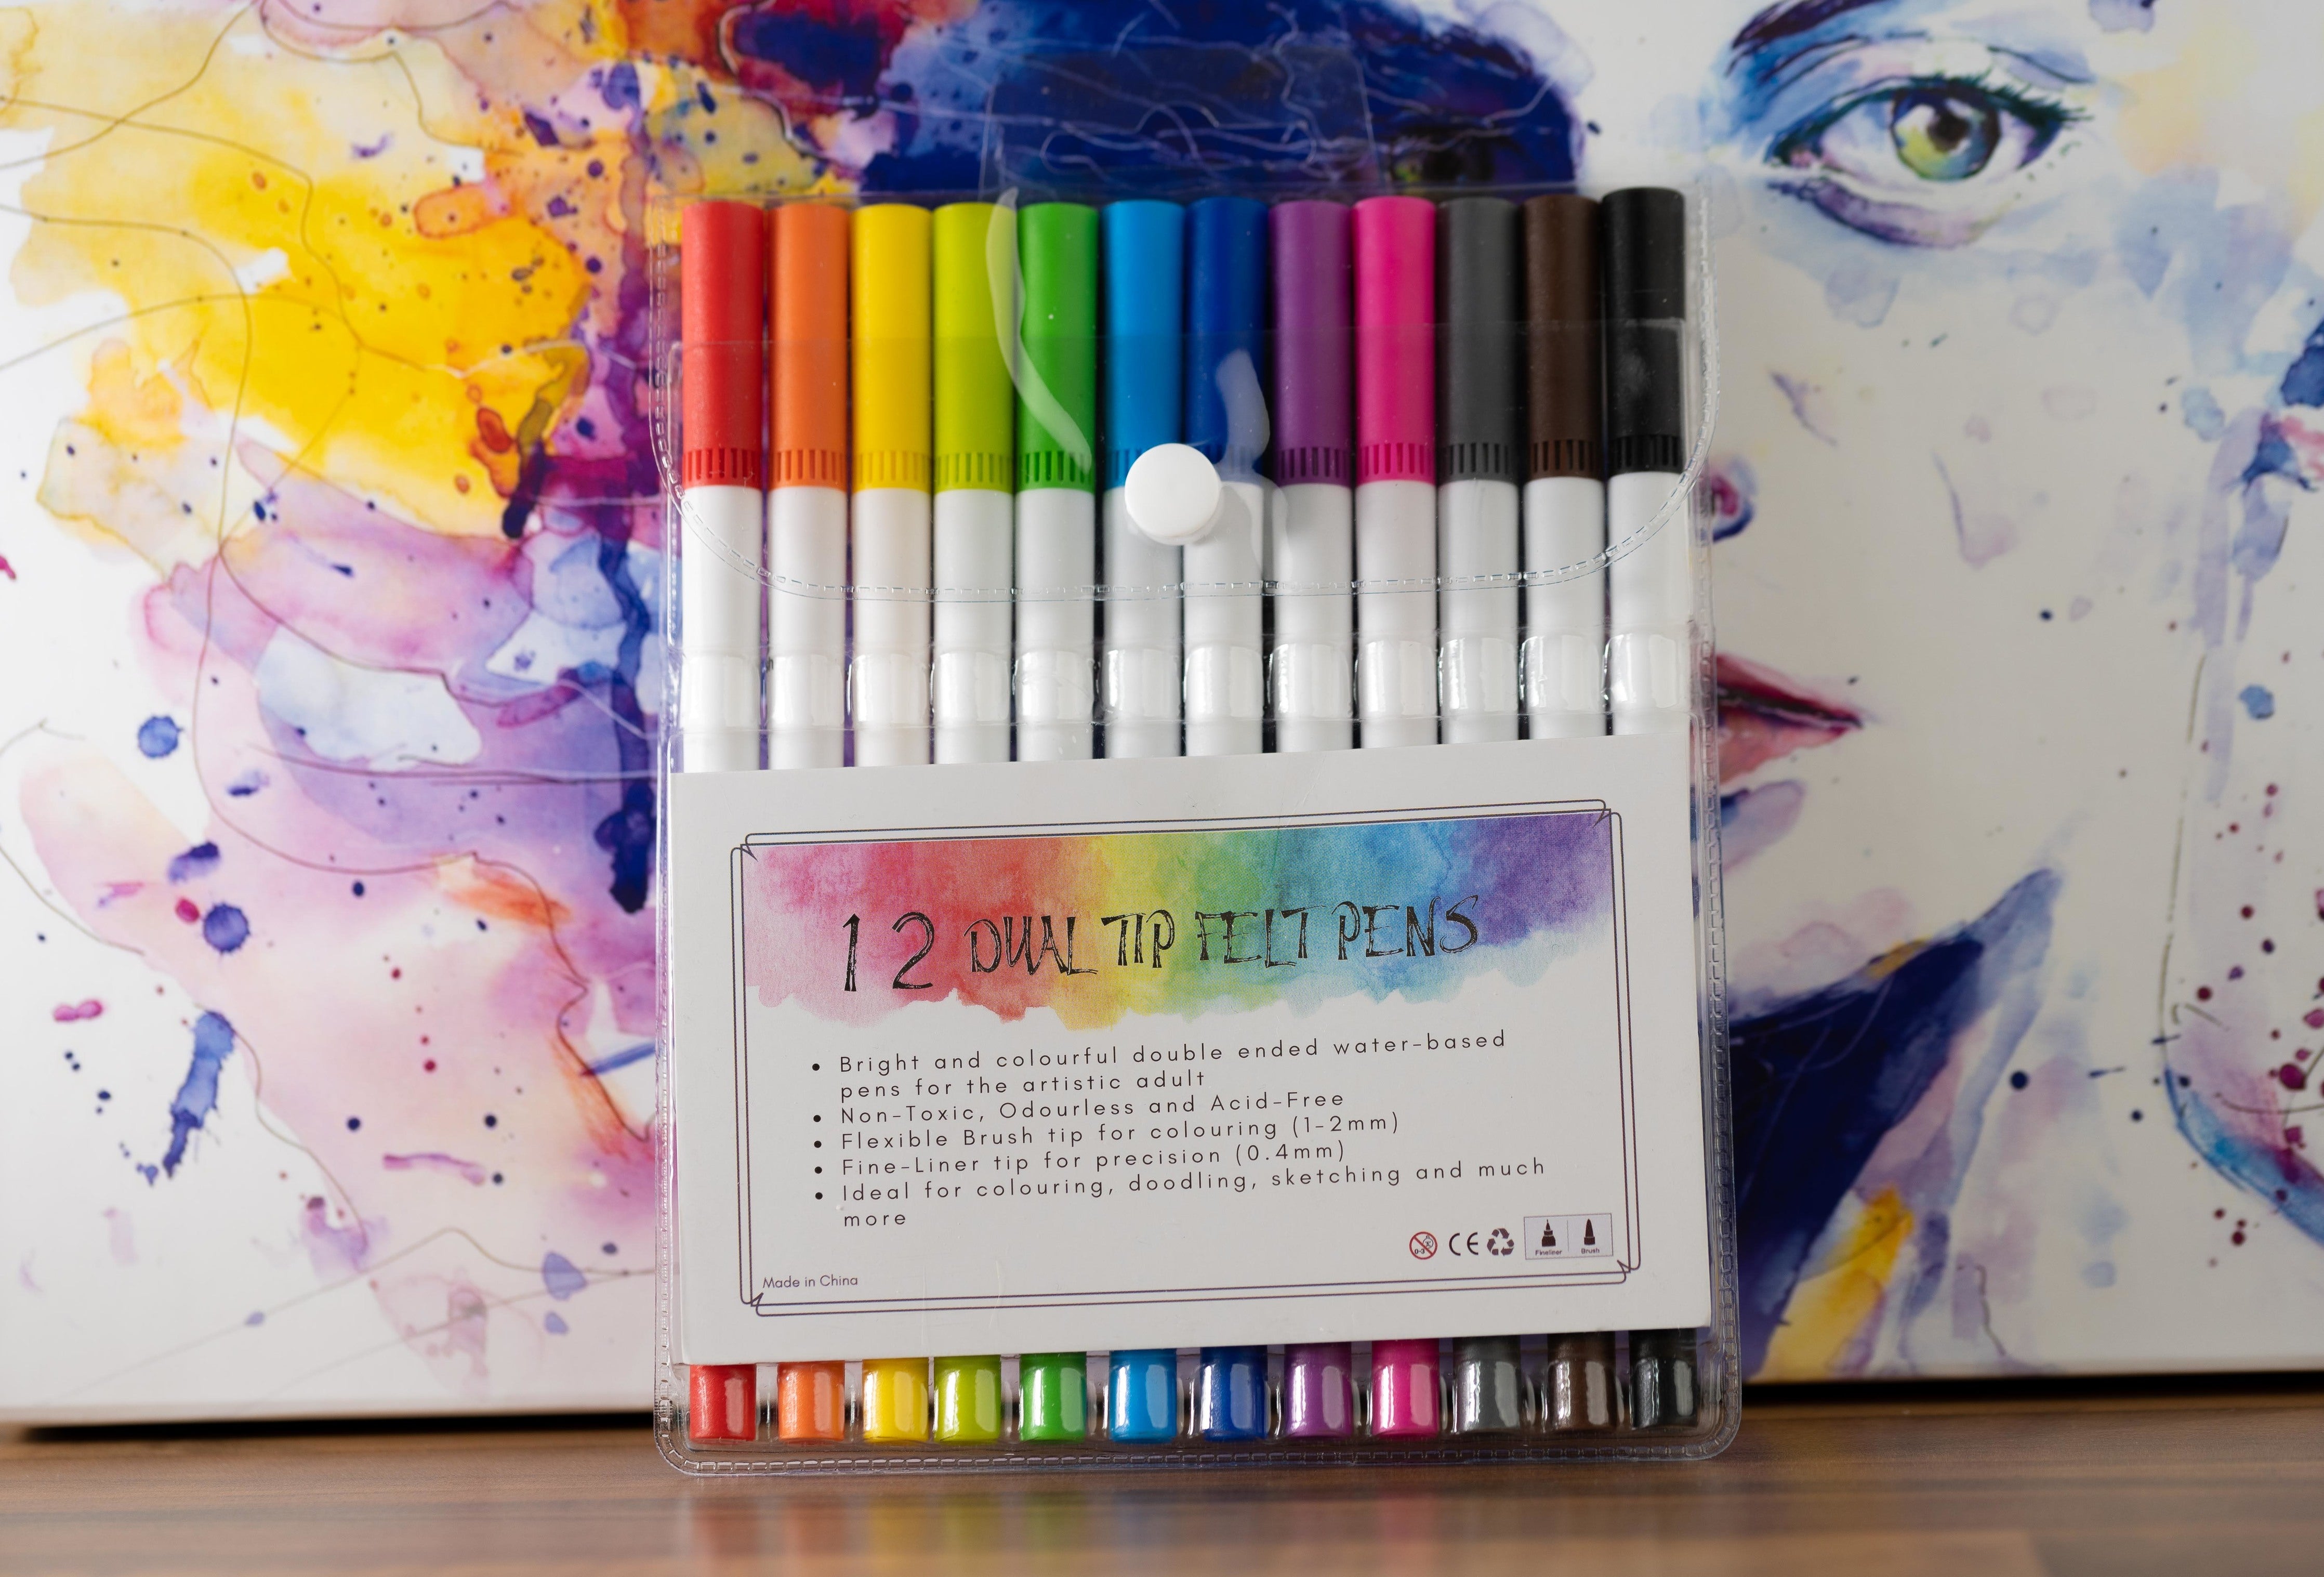 12 Dual Tip Felt Pens – Therapy Unboxed